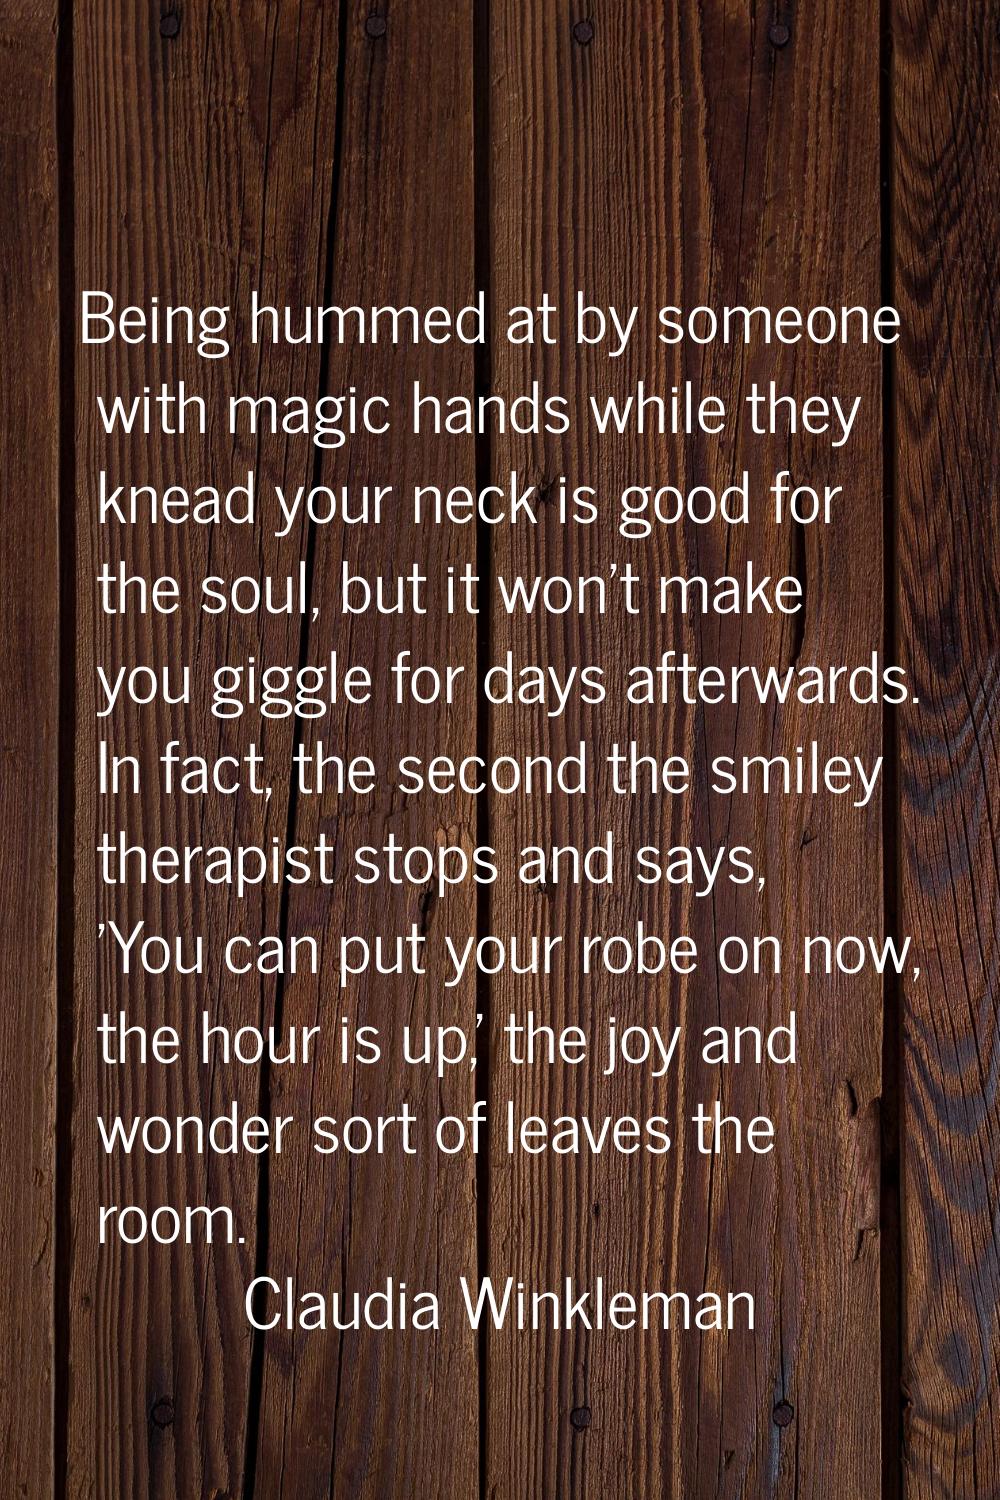 Being hummed at by someone with magic hands while they knead your neck is good for the soul, but it